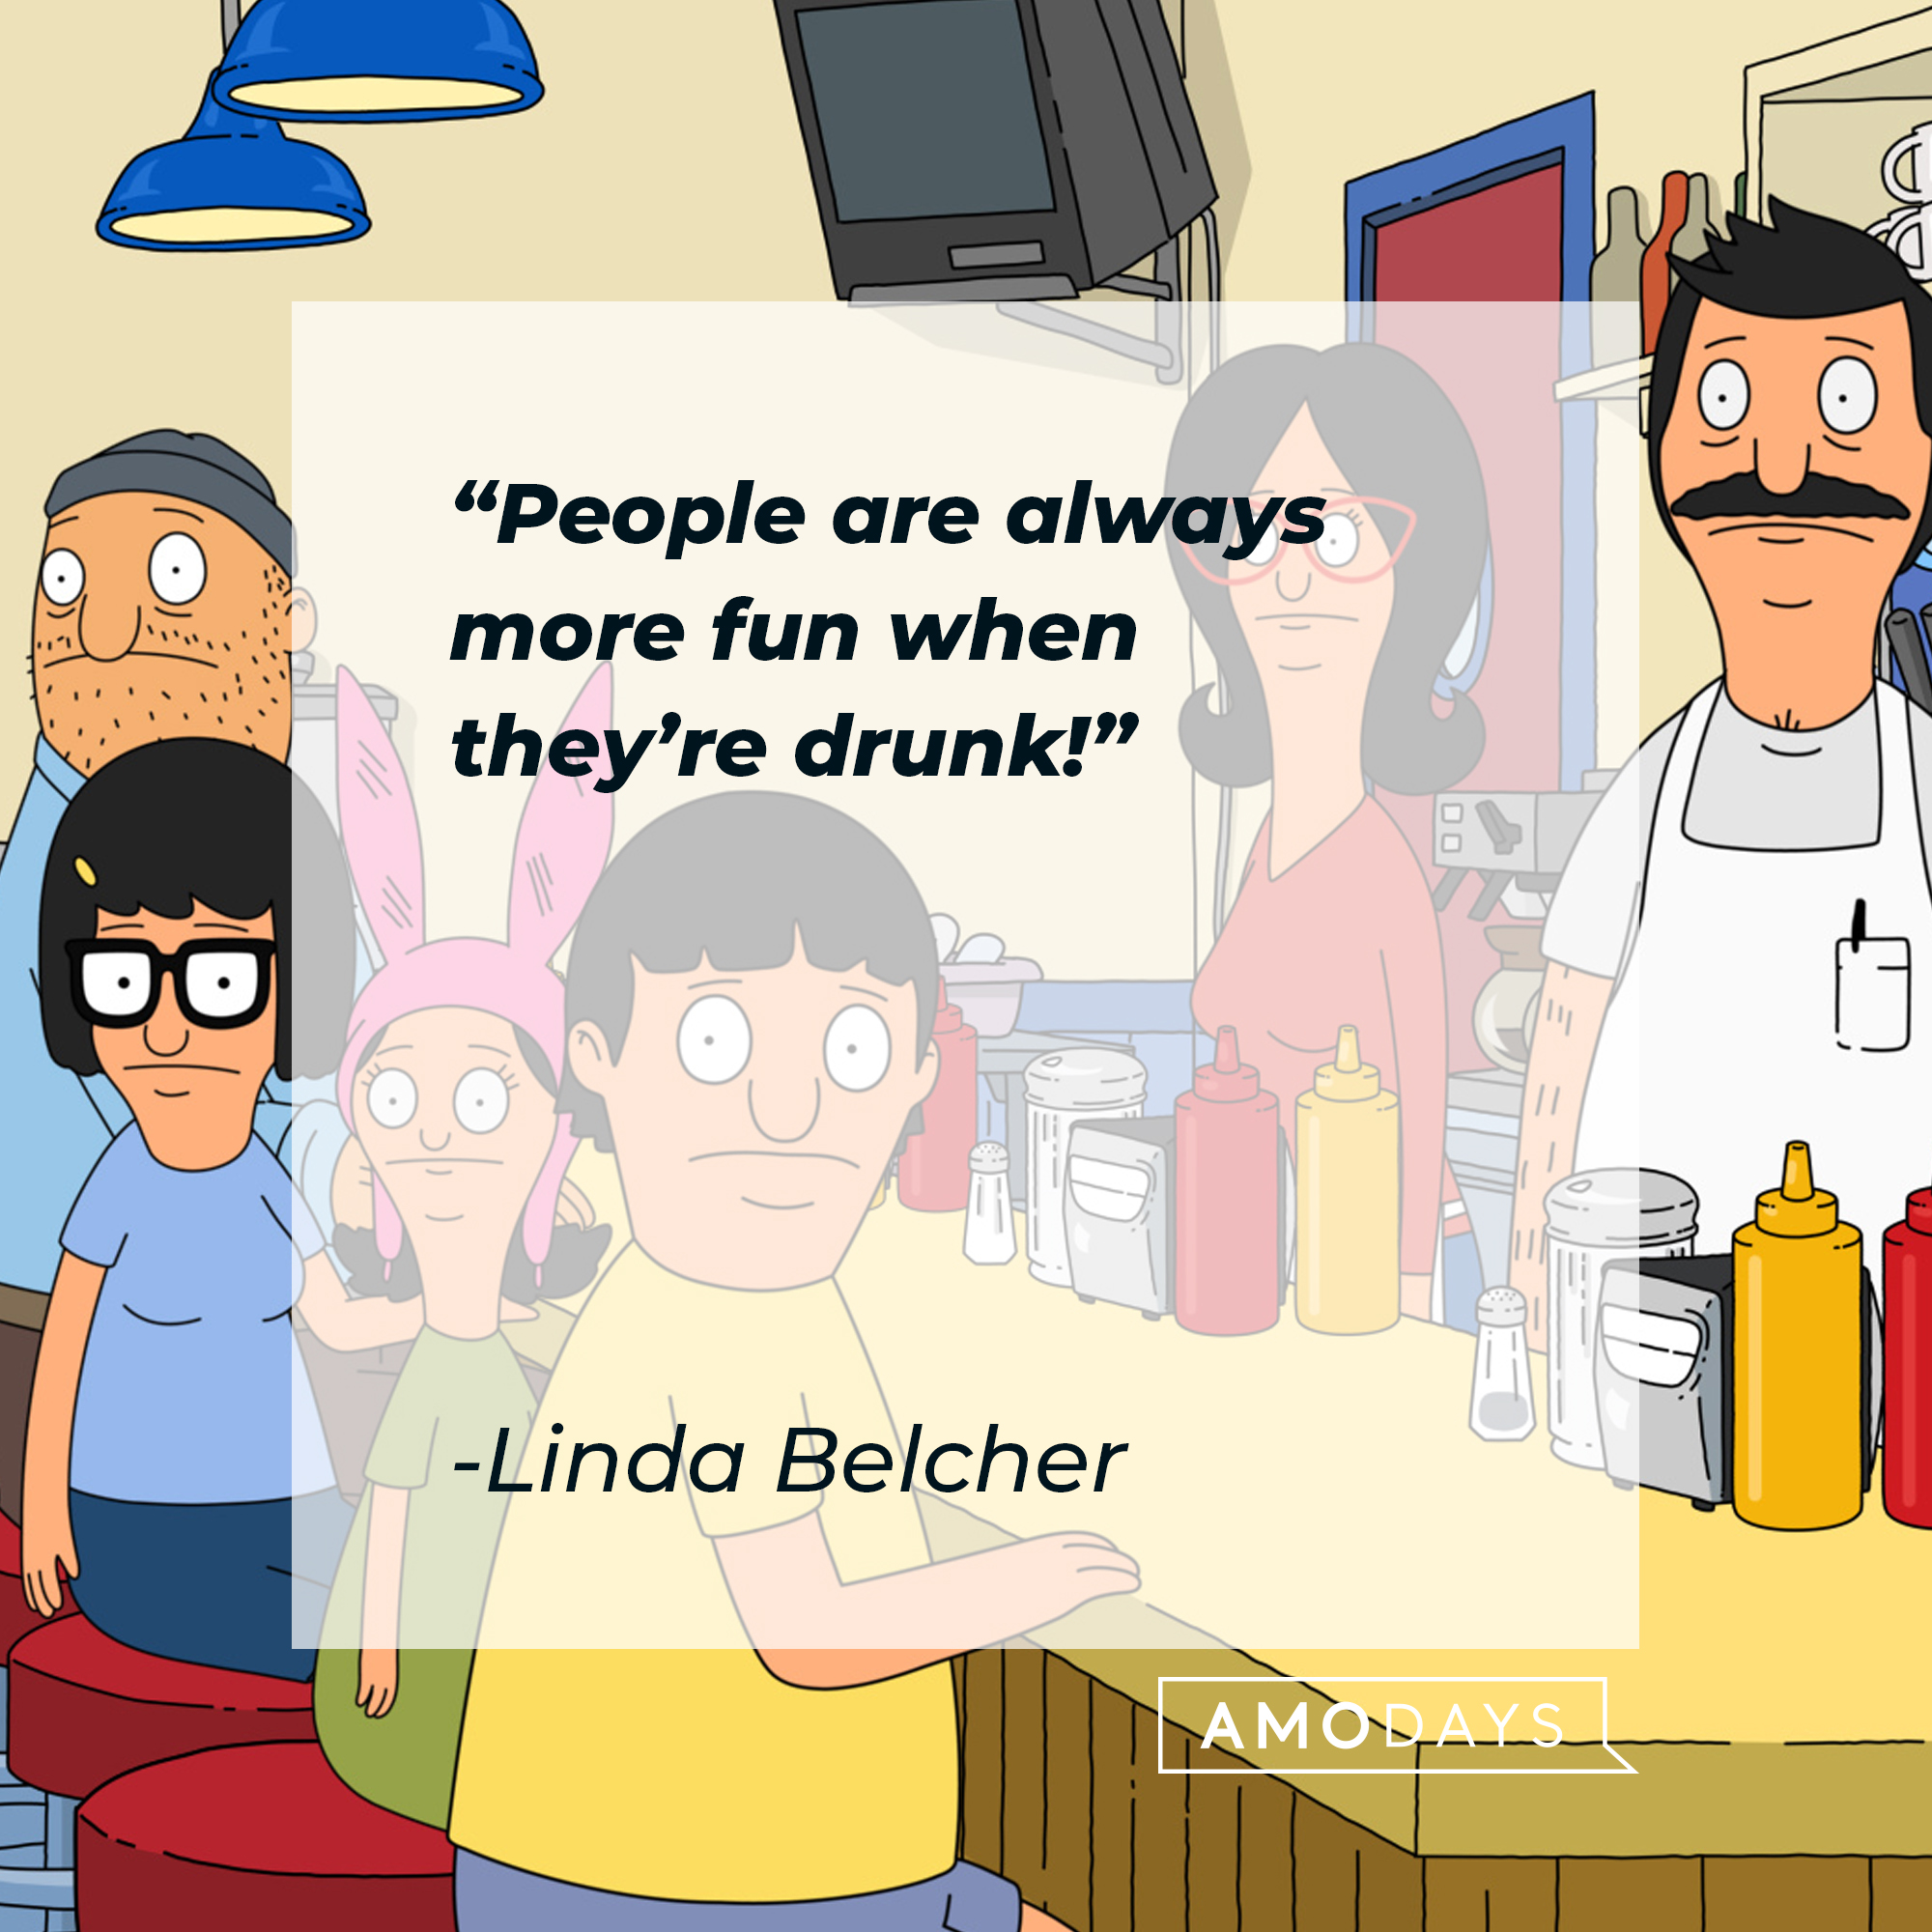 Linda Belcher's quote: "People are always more fun when they’re drunk!" | Source: facebook.com/BobsBurgers